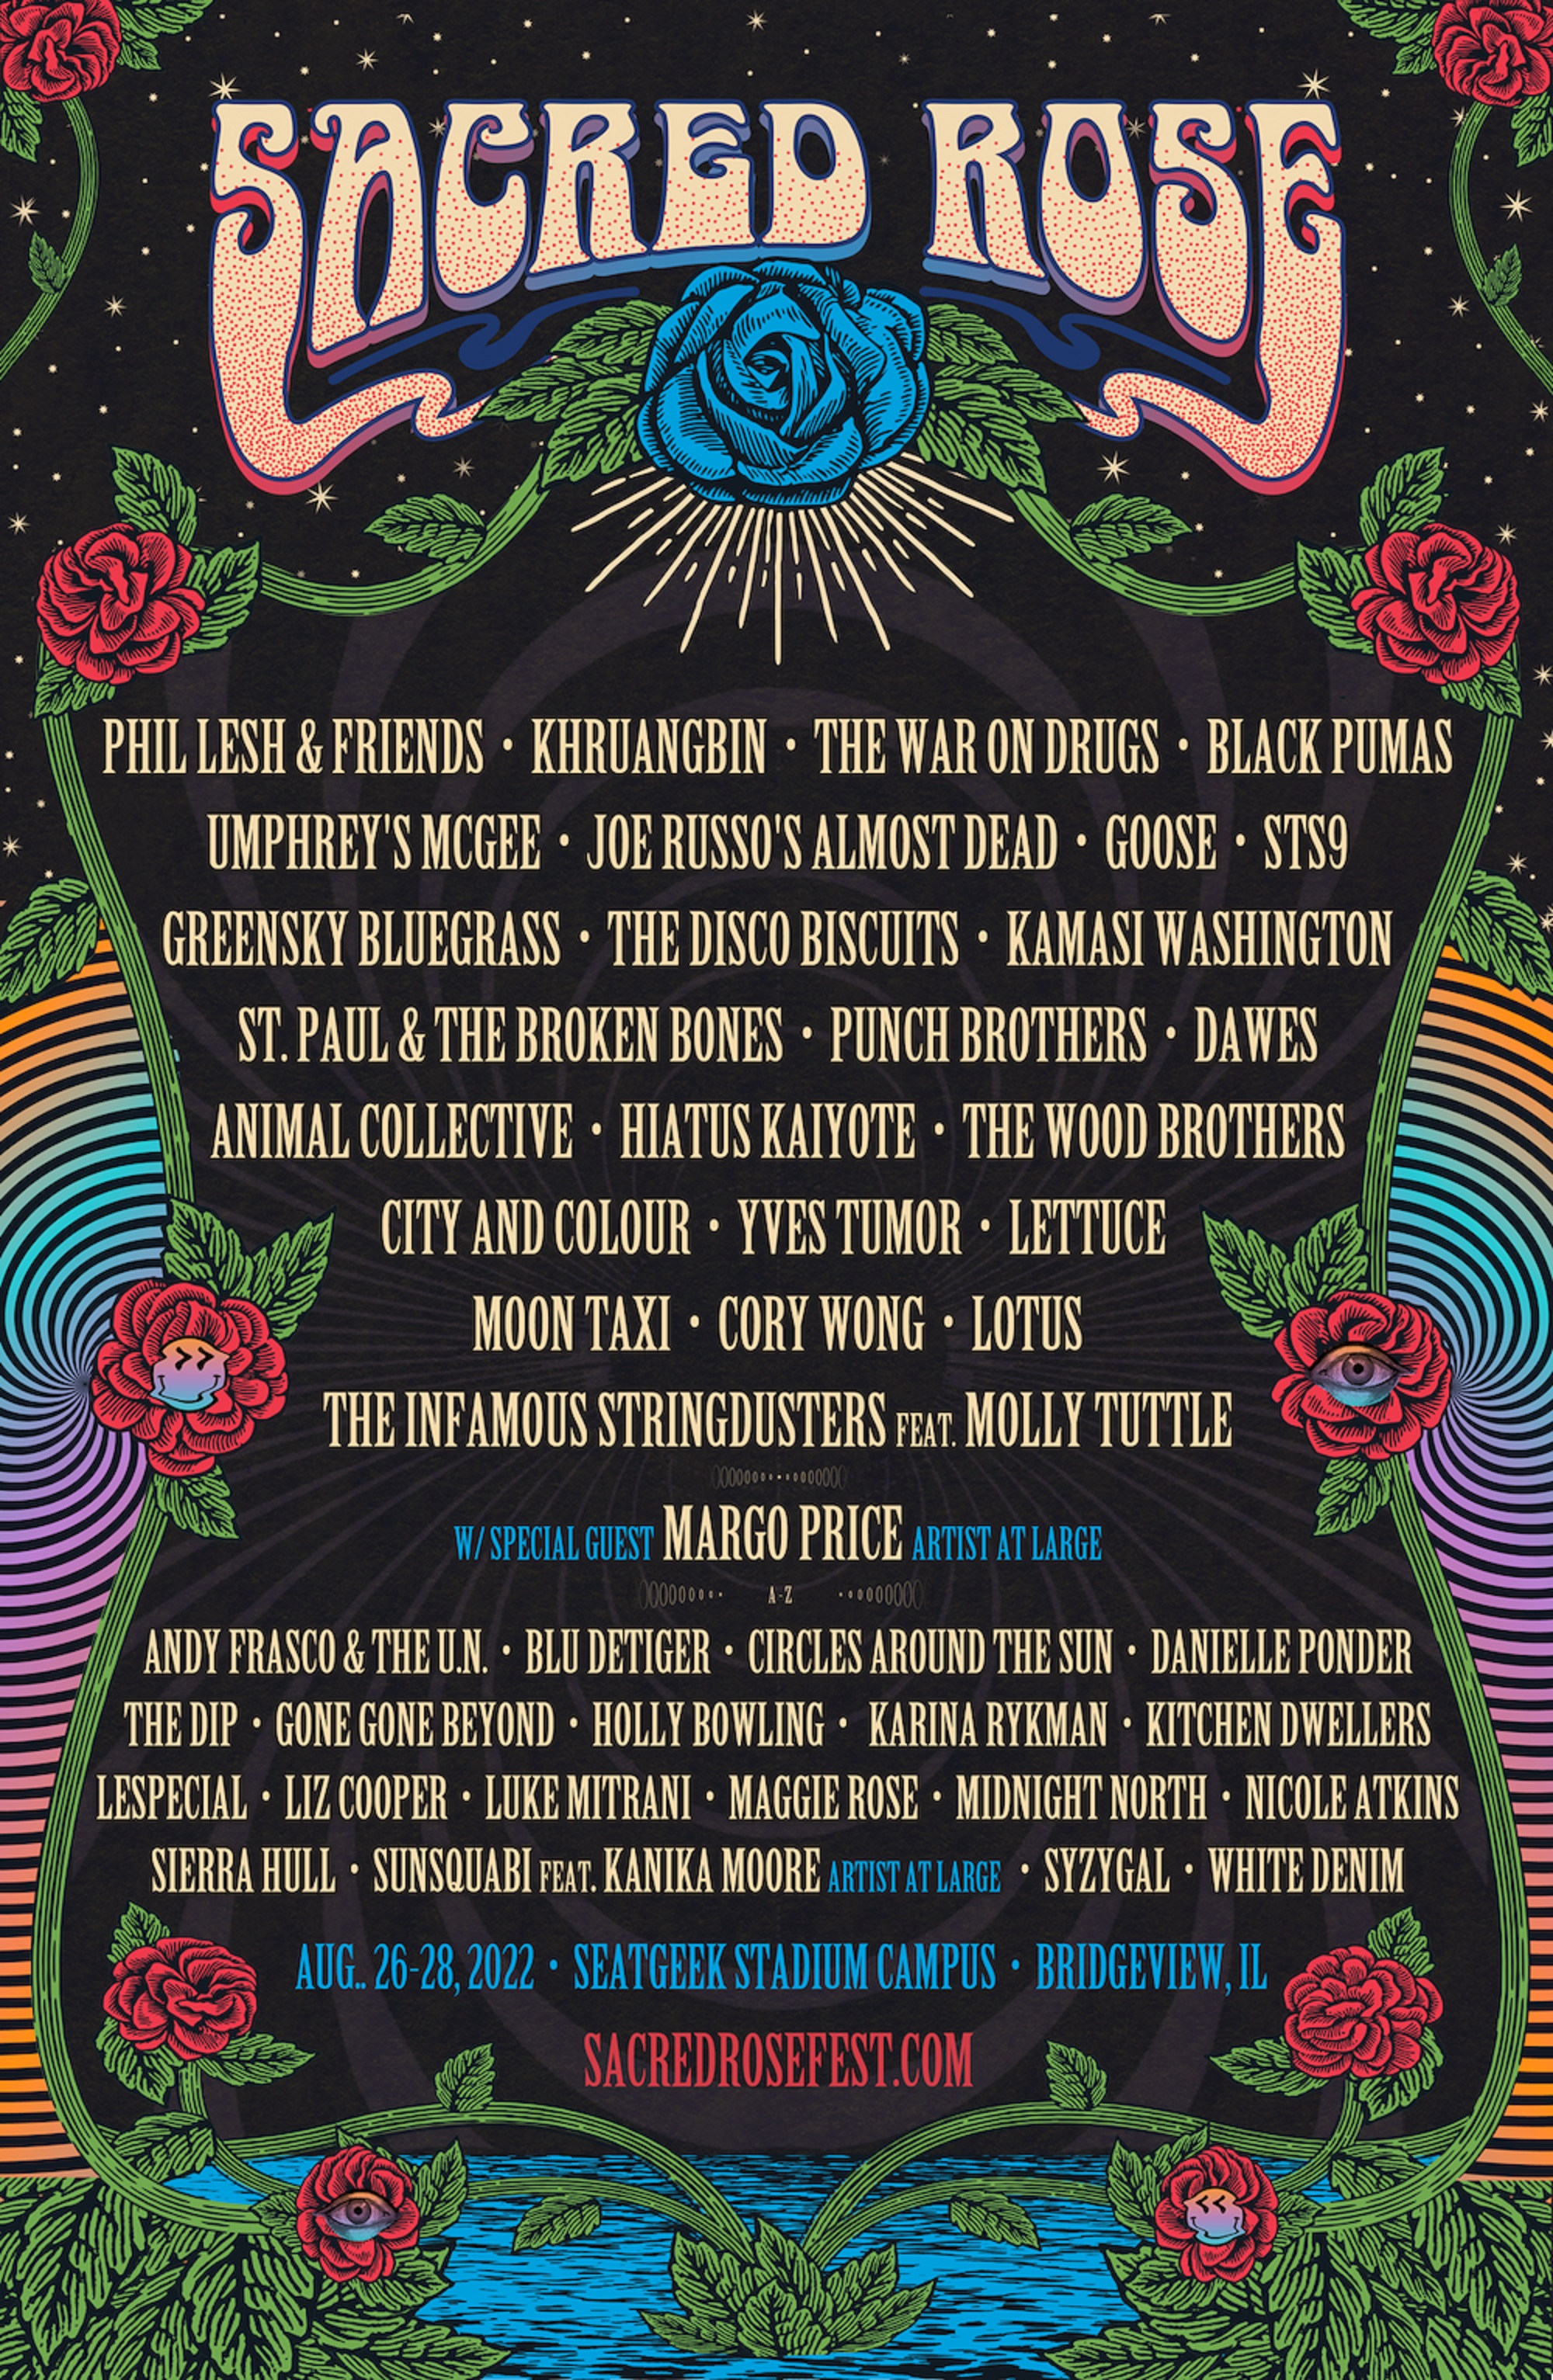 SACRED ROSE debuts in Chicago: Phil Lesh, Khruangbin, The War On Drugs, Black Pumas, Umphrey’s McGee & more